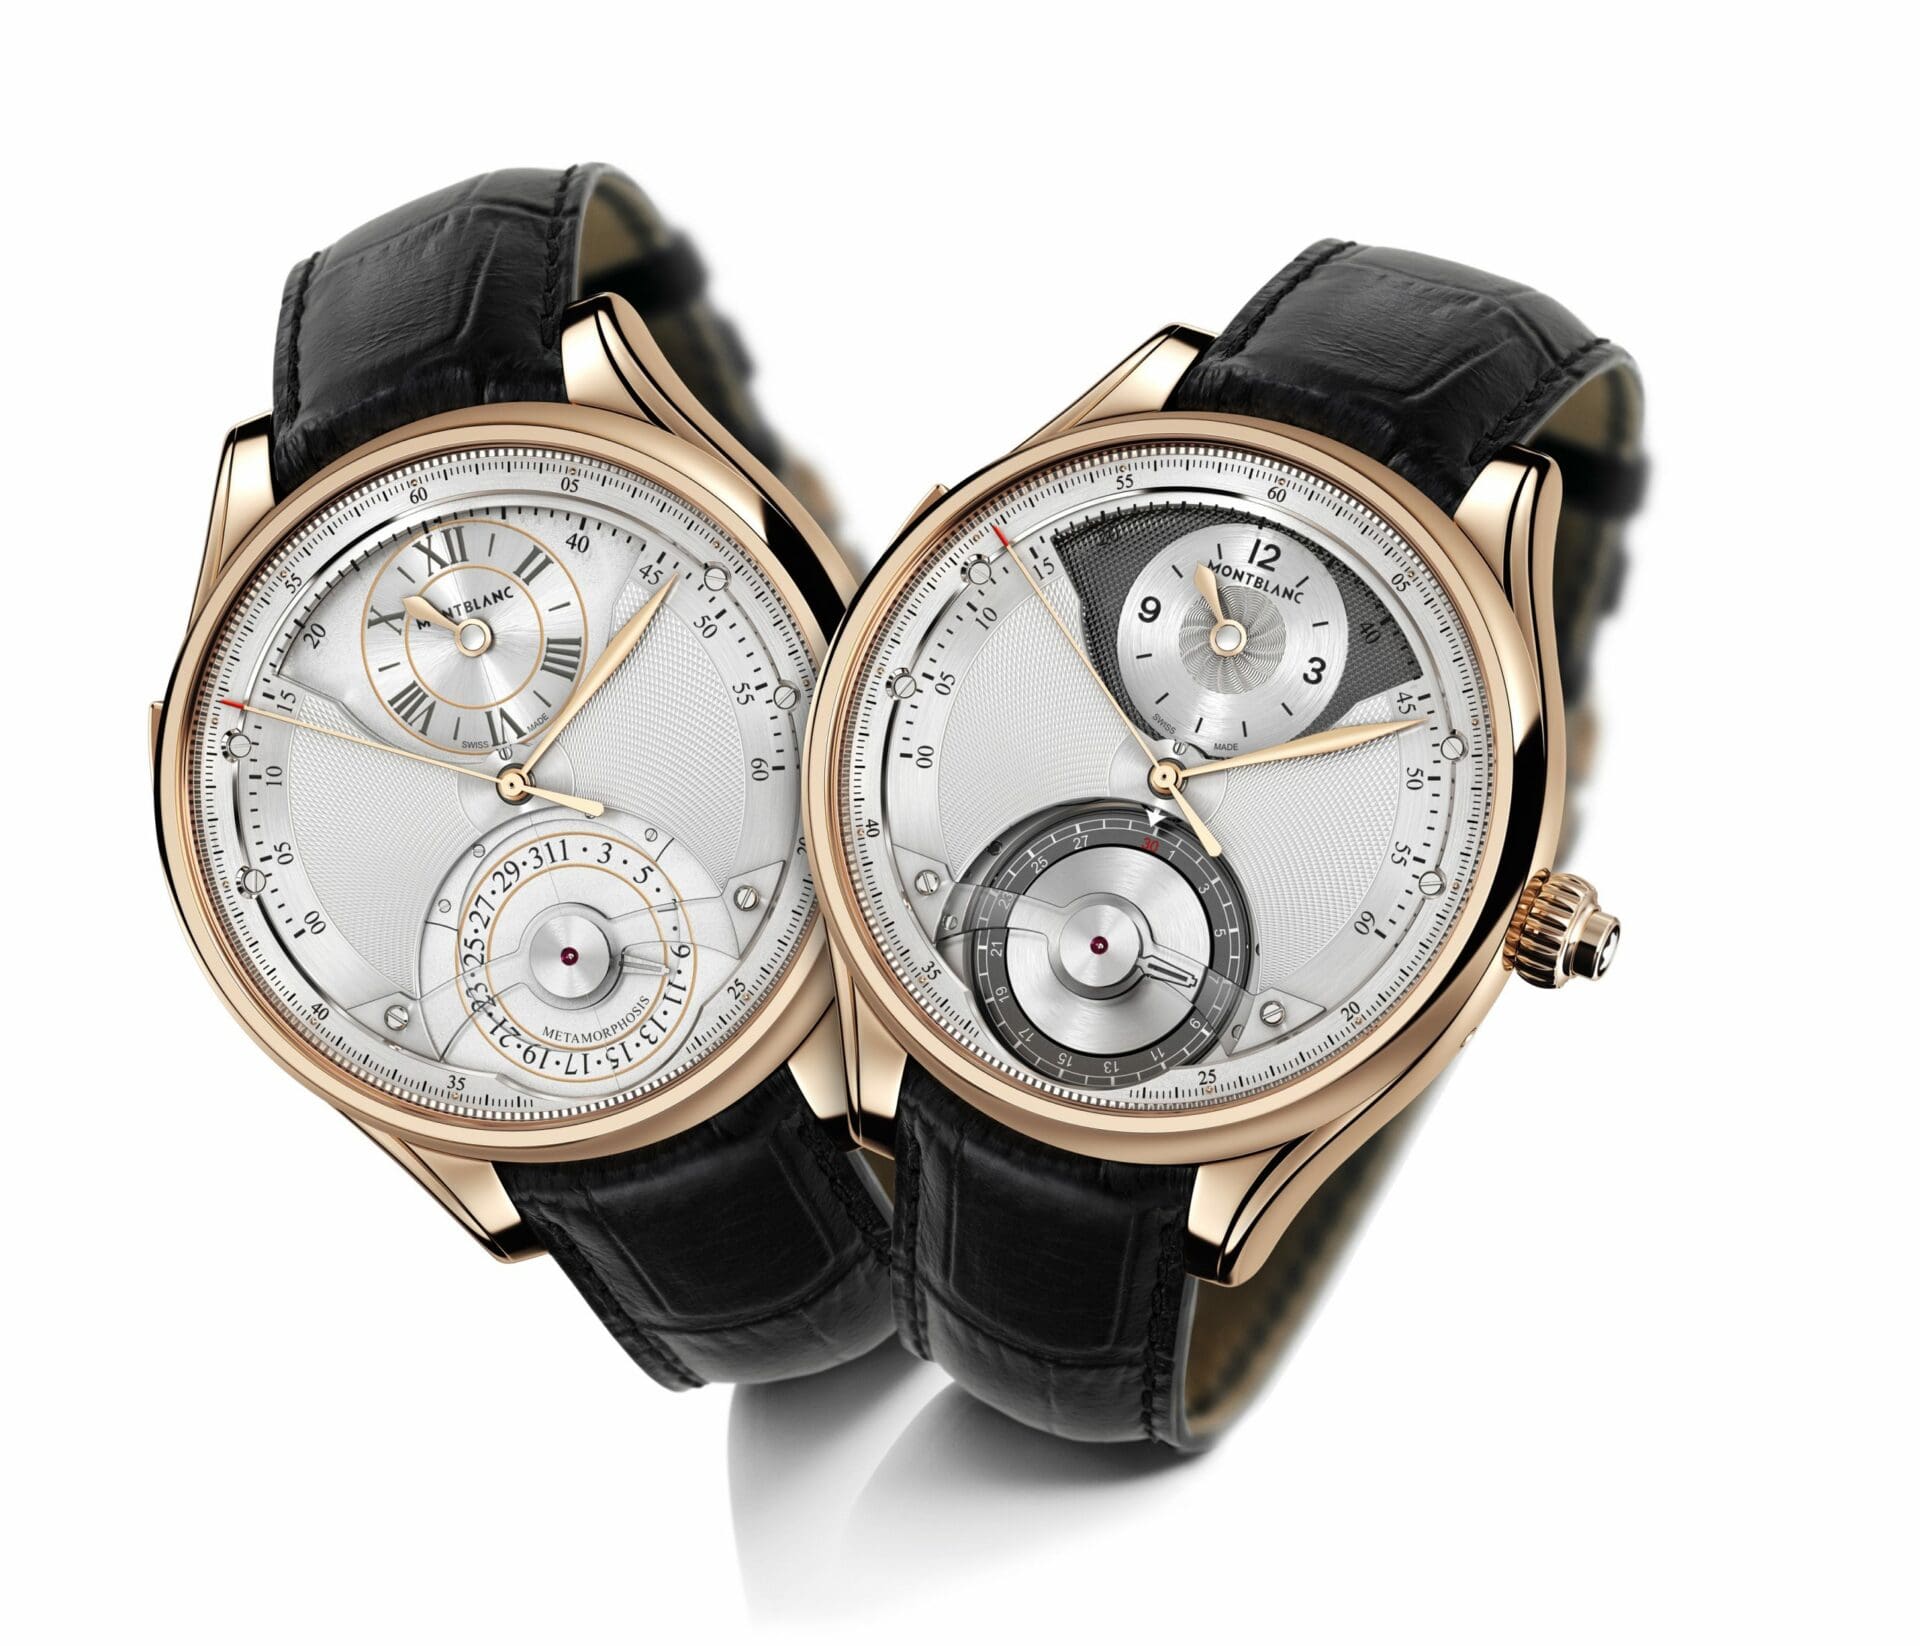 Montblanc Watches: The Complete Buying Guide